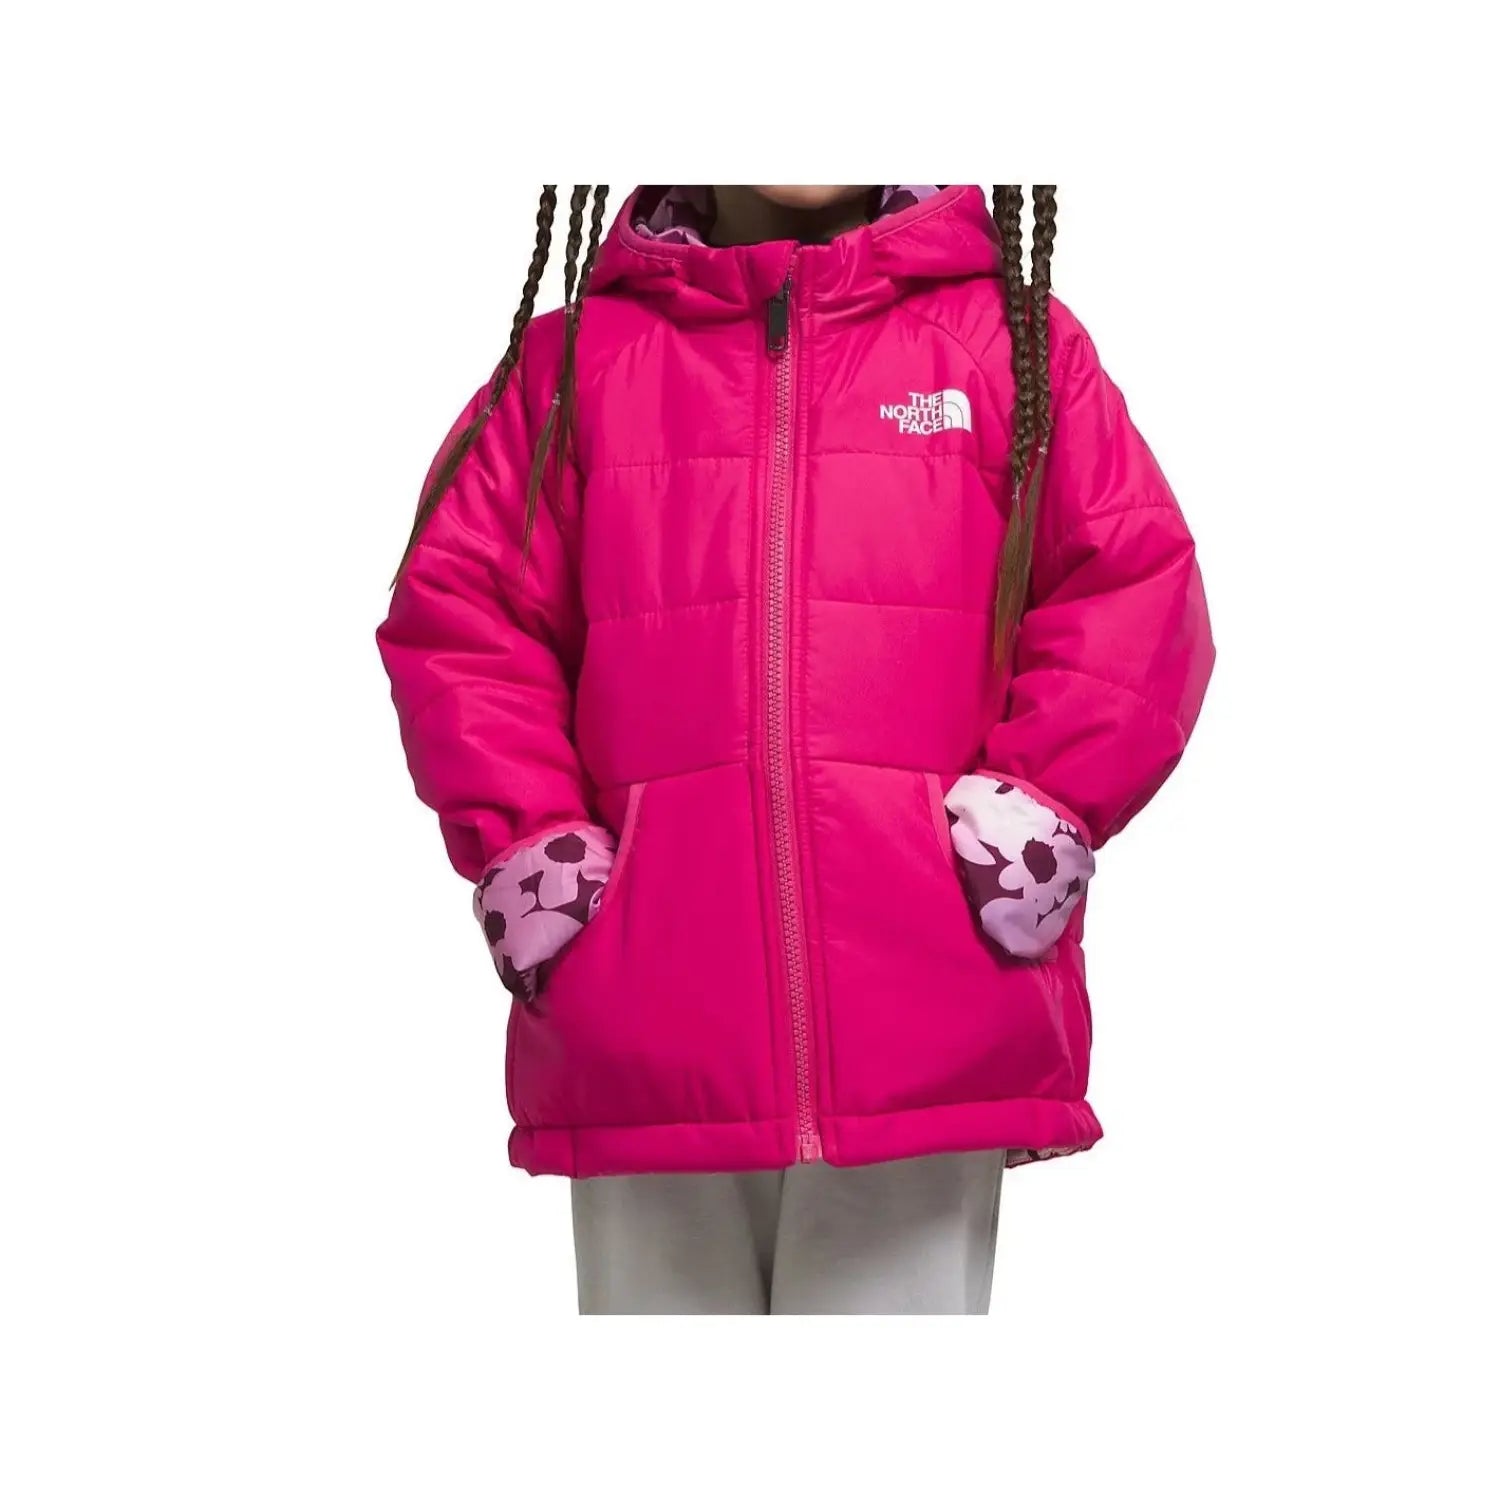 The North Face Kid's Perrito Reversible Hooded Jacket shown in Mr. Pink. color option.